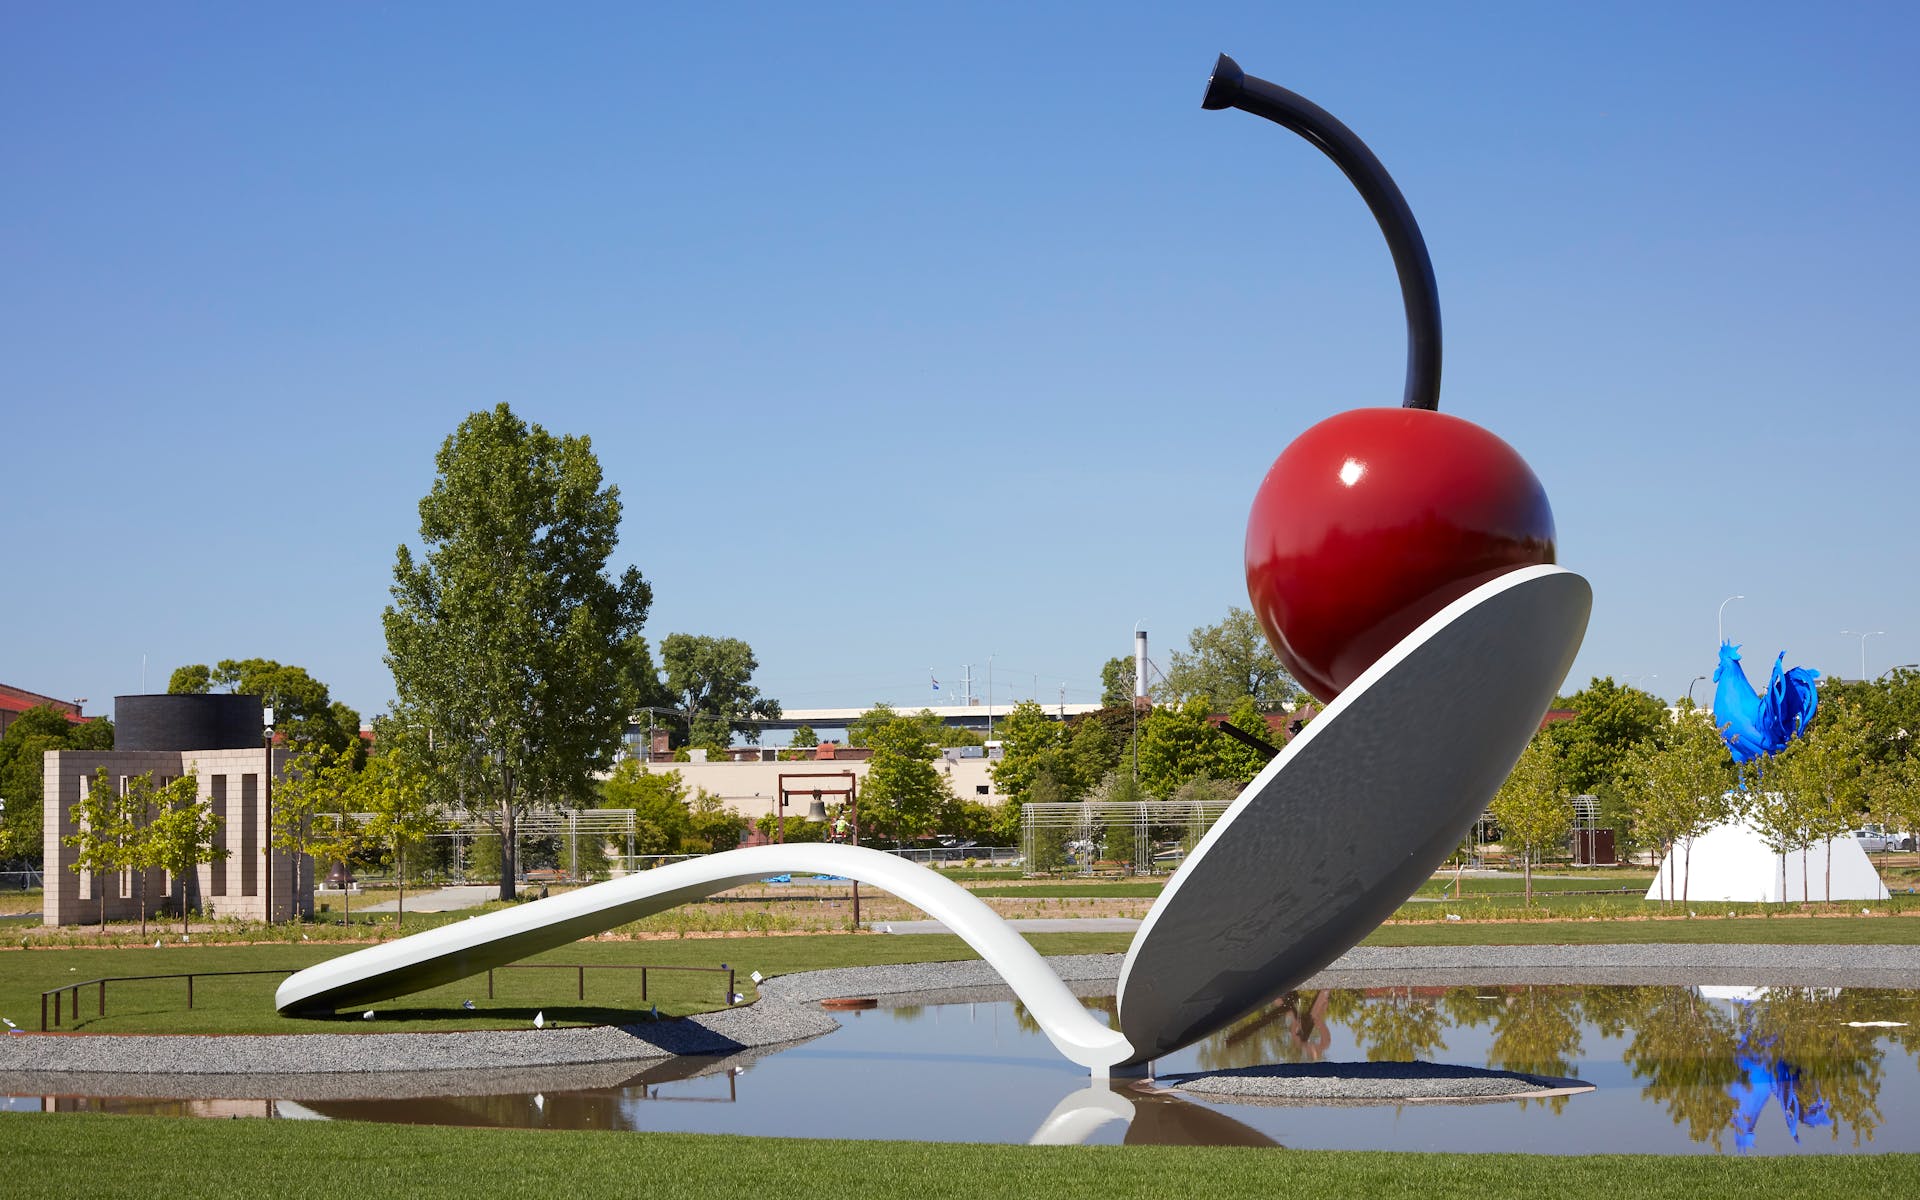 Image of large spoon and cherry sculpture on top of pond, with trees and sky in the background